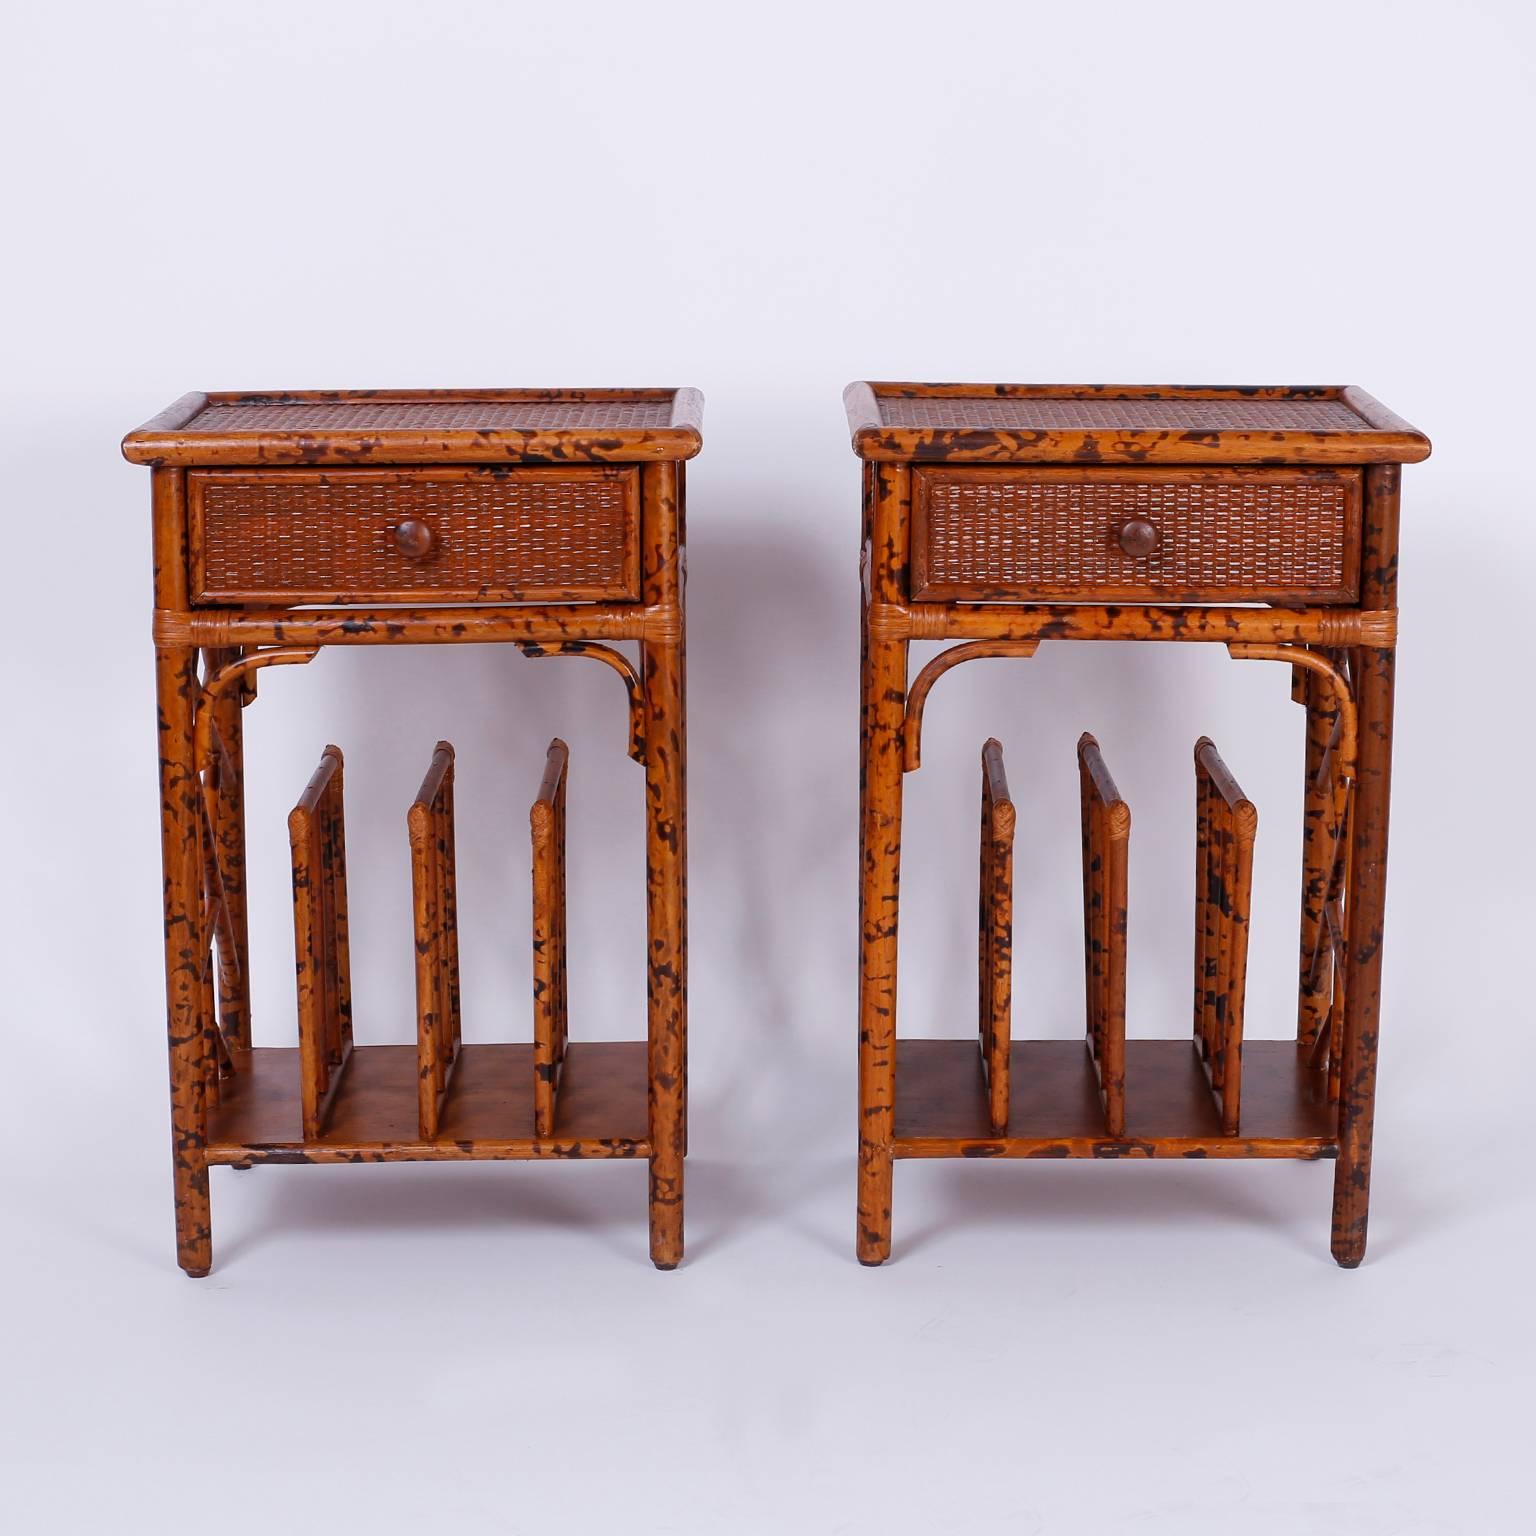 Asian inspired one drawer rattan or wicker nightstands or  end tables with a faux tortoiseshell painted bamboo frame, grass cloth panels, Chinese Chippendale style sides and a three sectioned magazine or book rack in the base. East meets west in